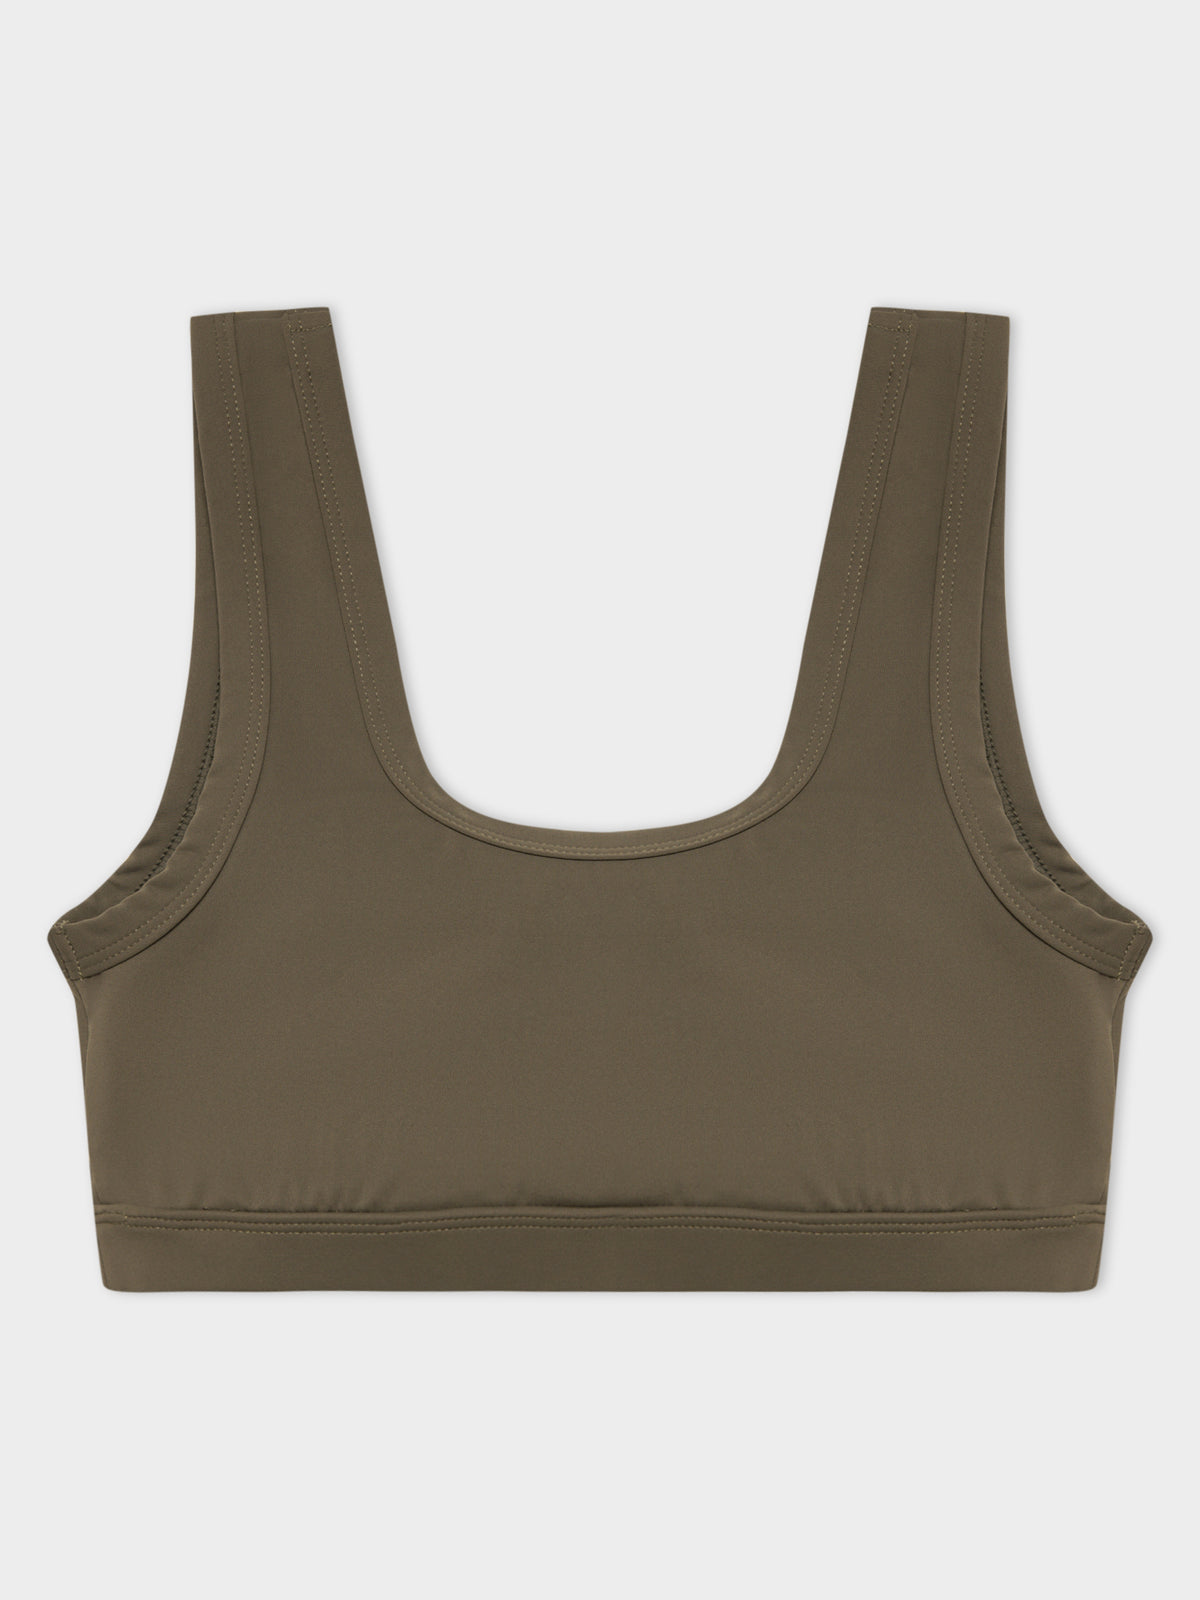 Nude Active Sports Bra in Olive